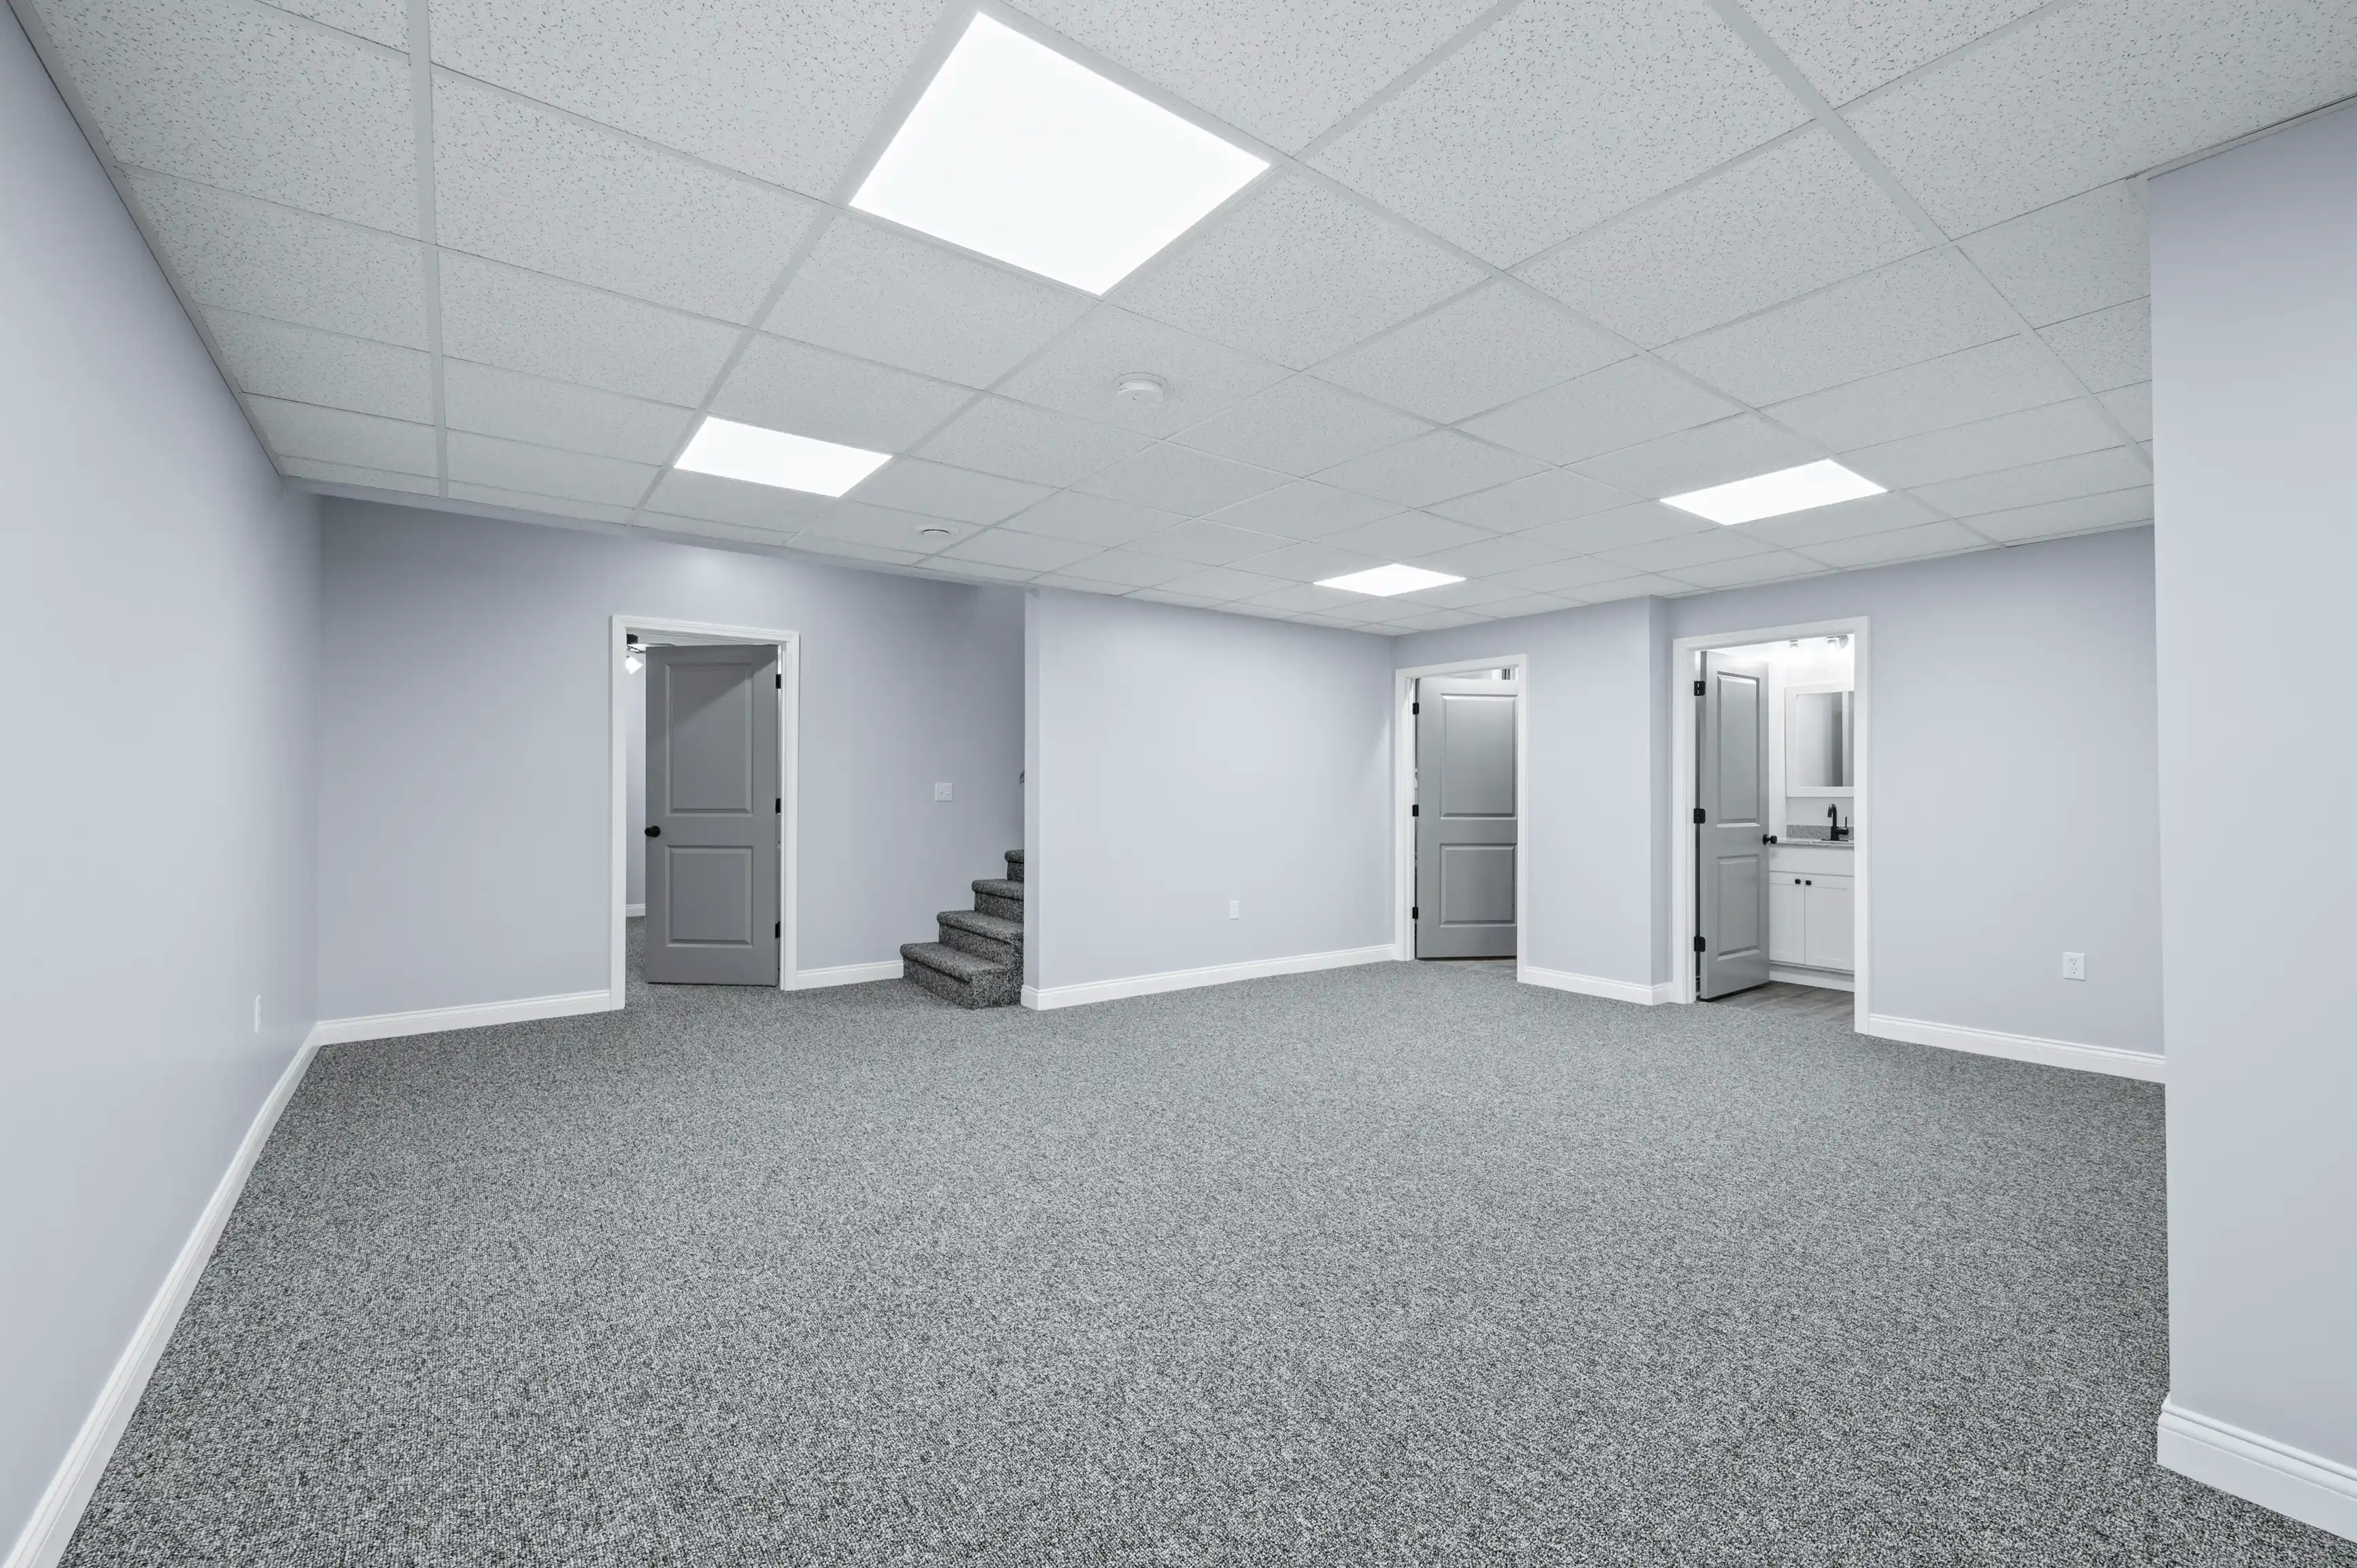 Spacious empty room with grey carpet, pale blue walls, recessed lighting, and multiple doors including one leading to a small kitchen area.